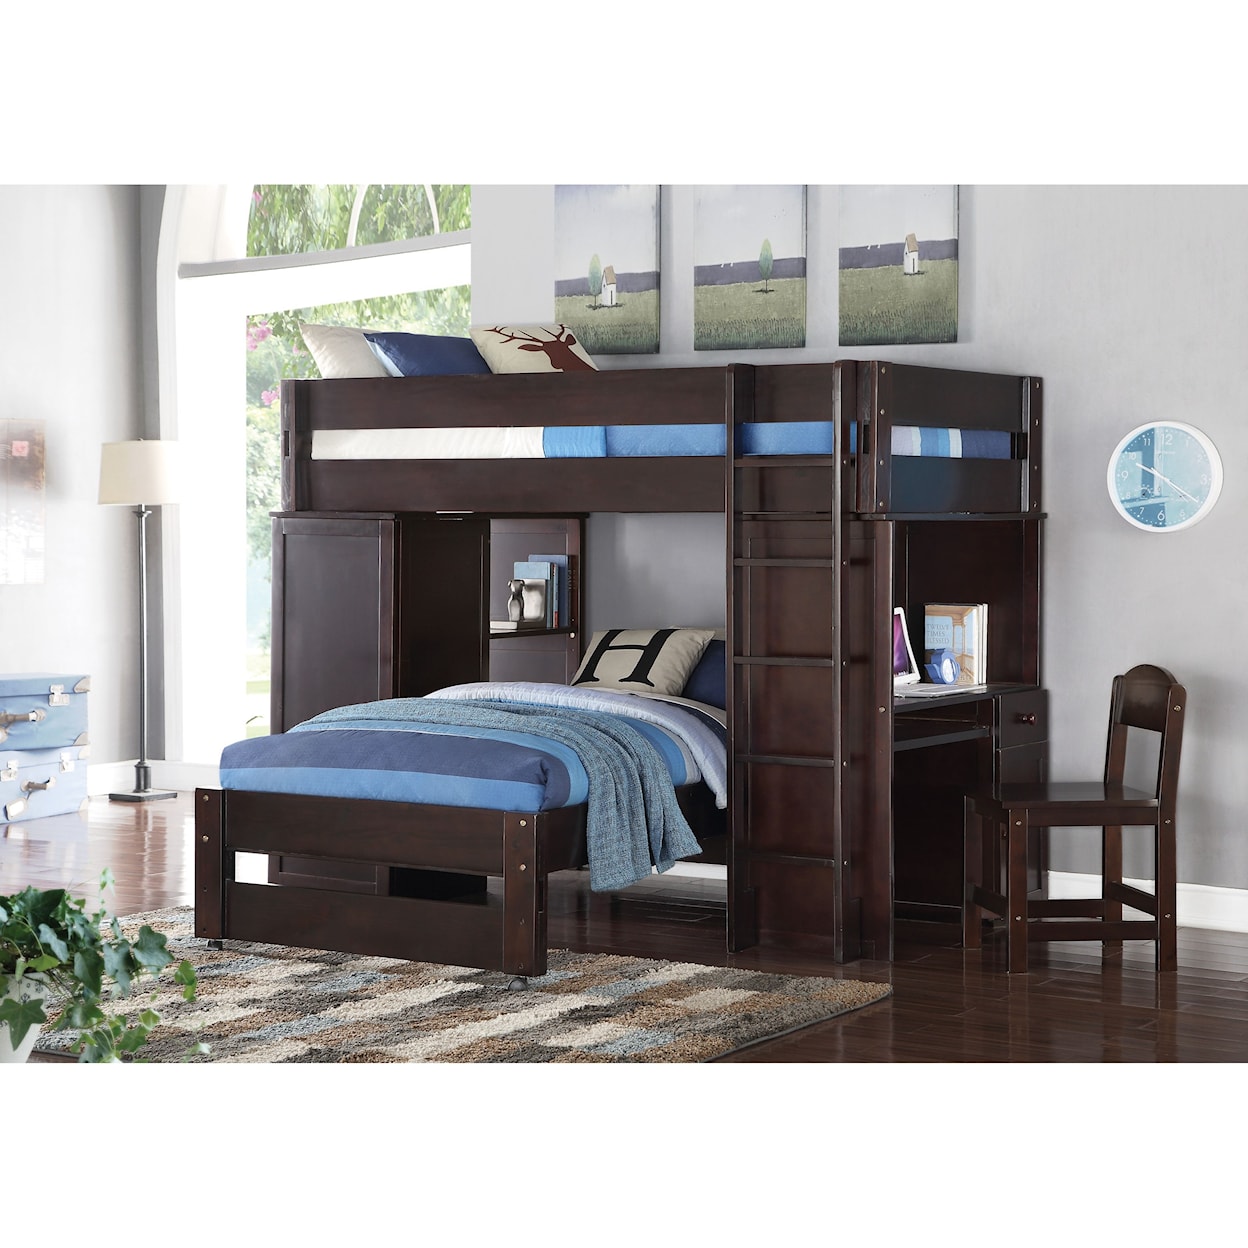 Acme Furniture Lars Loft and Twin Bed